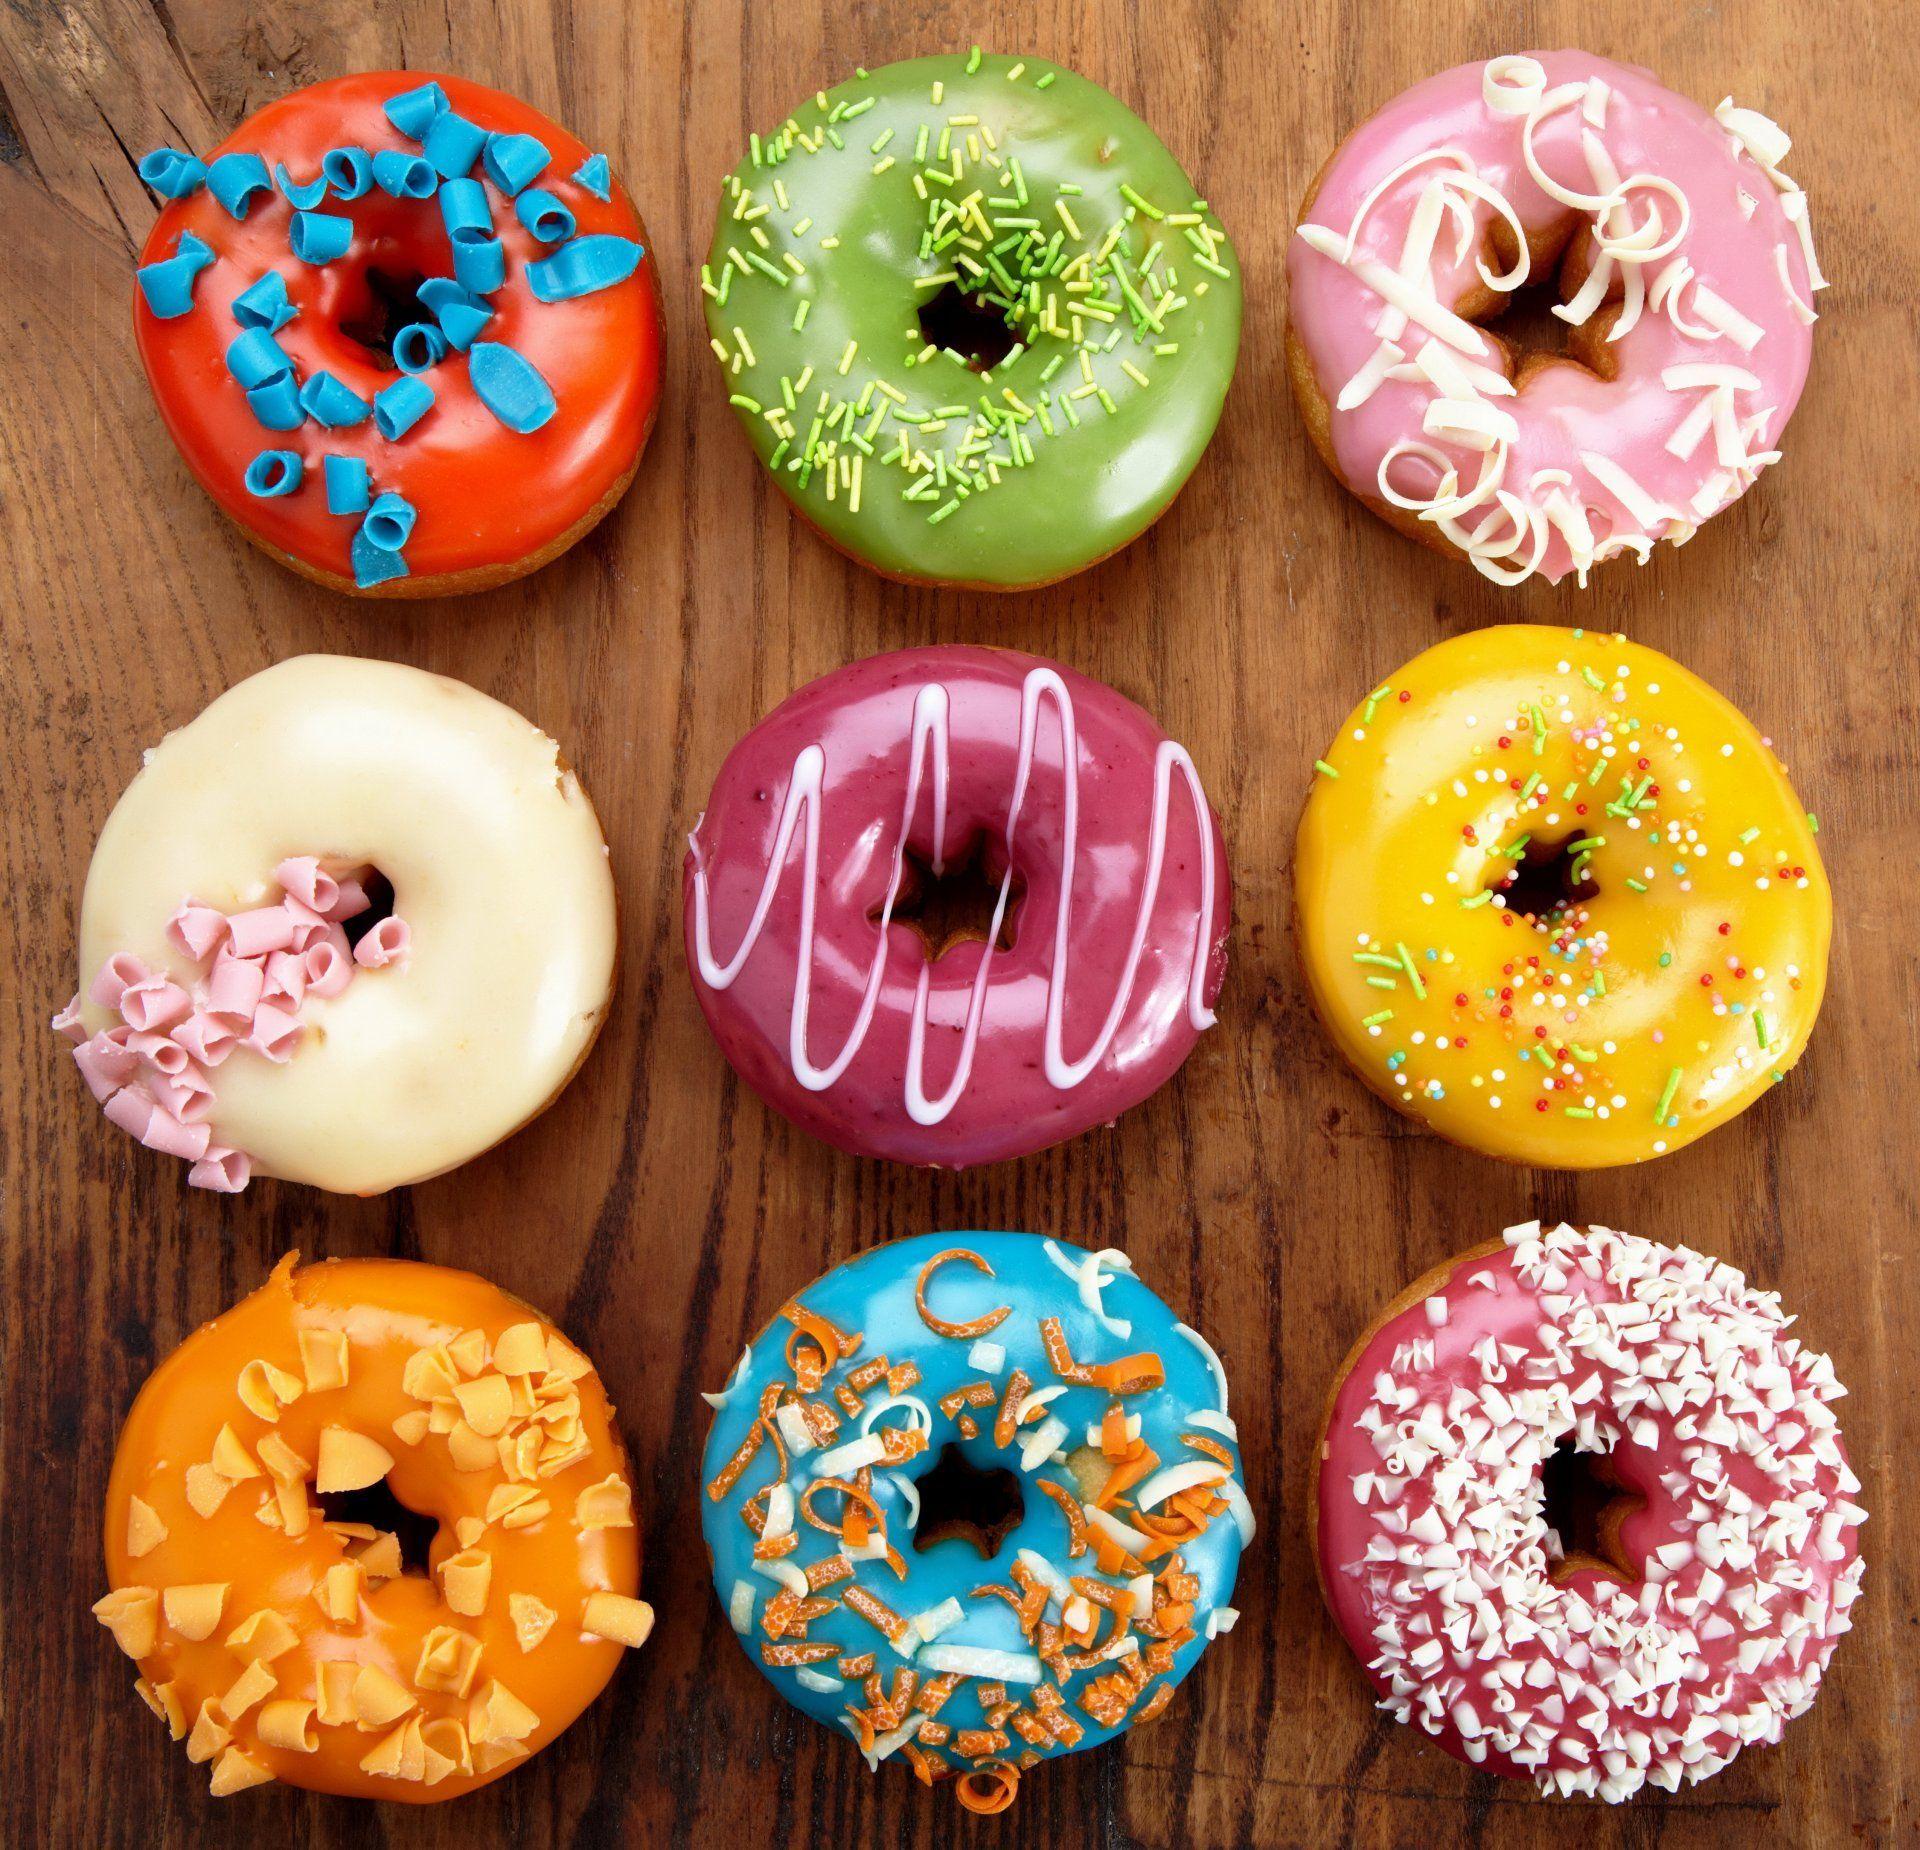 Colorful Donut Wallpaper, Donut.Printable Free Download